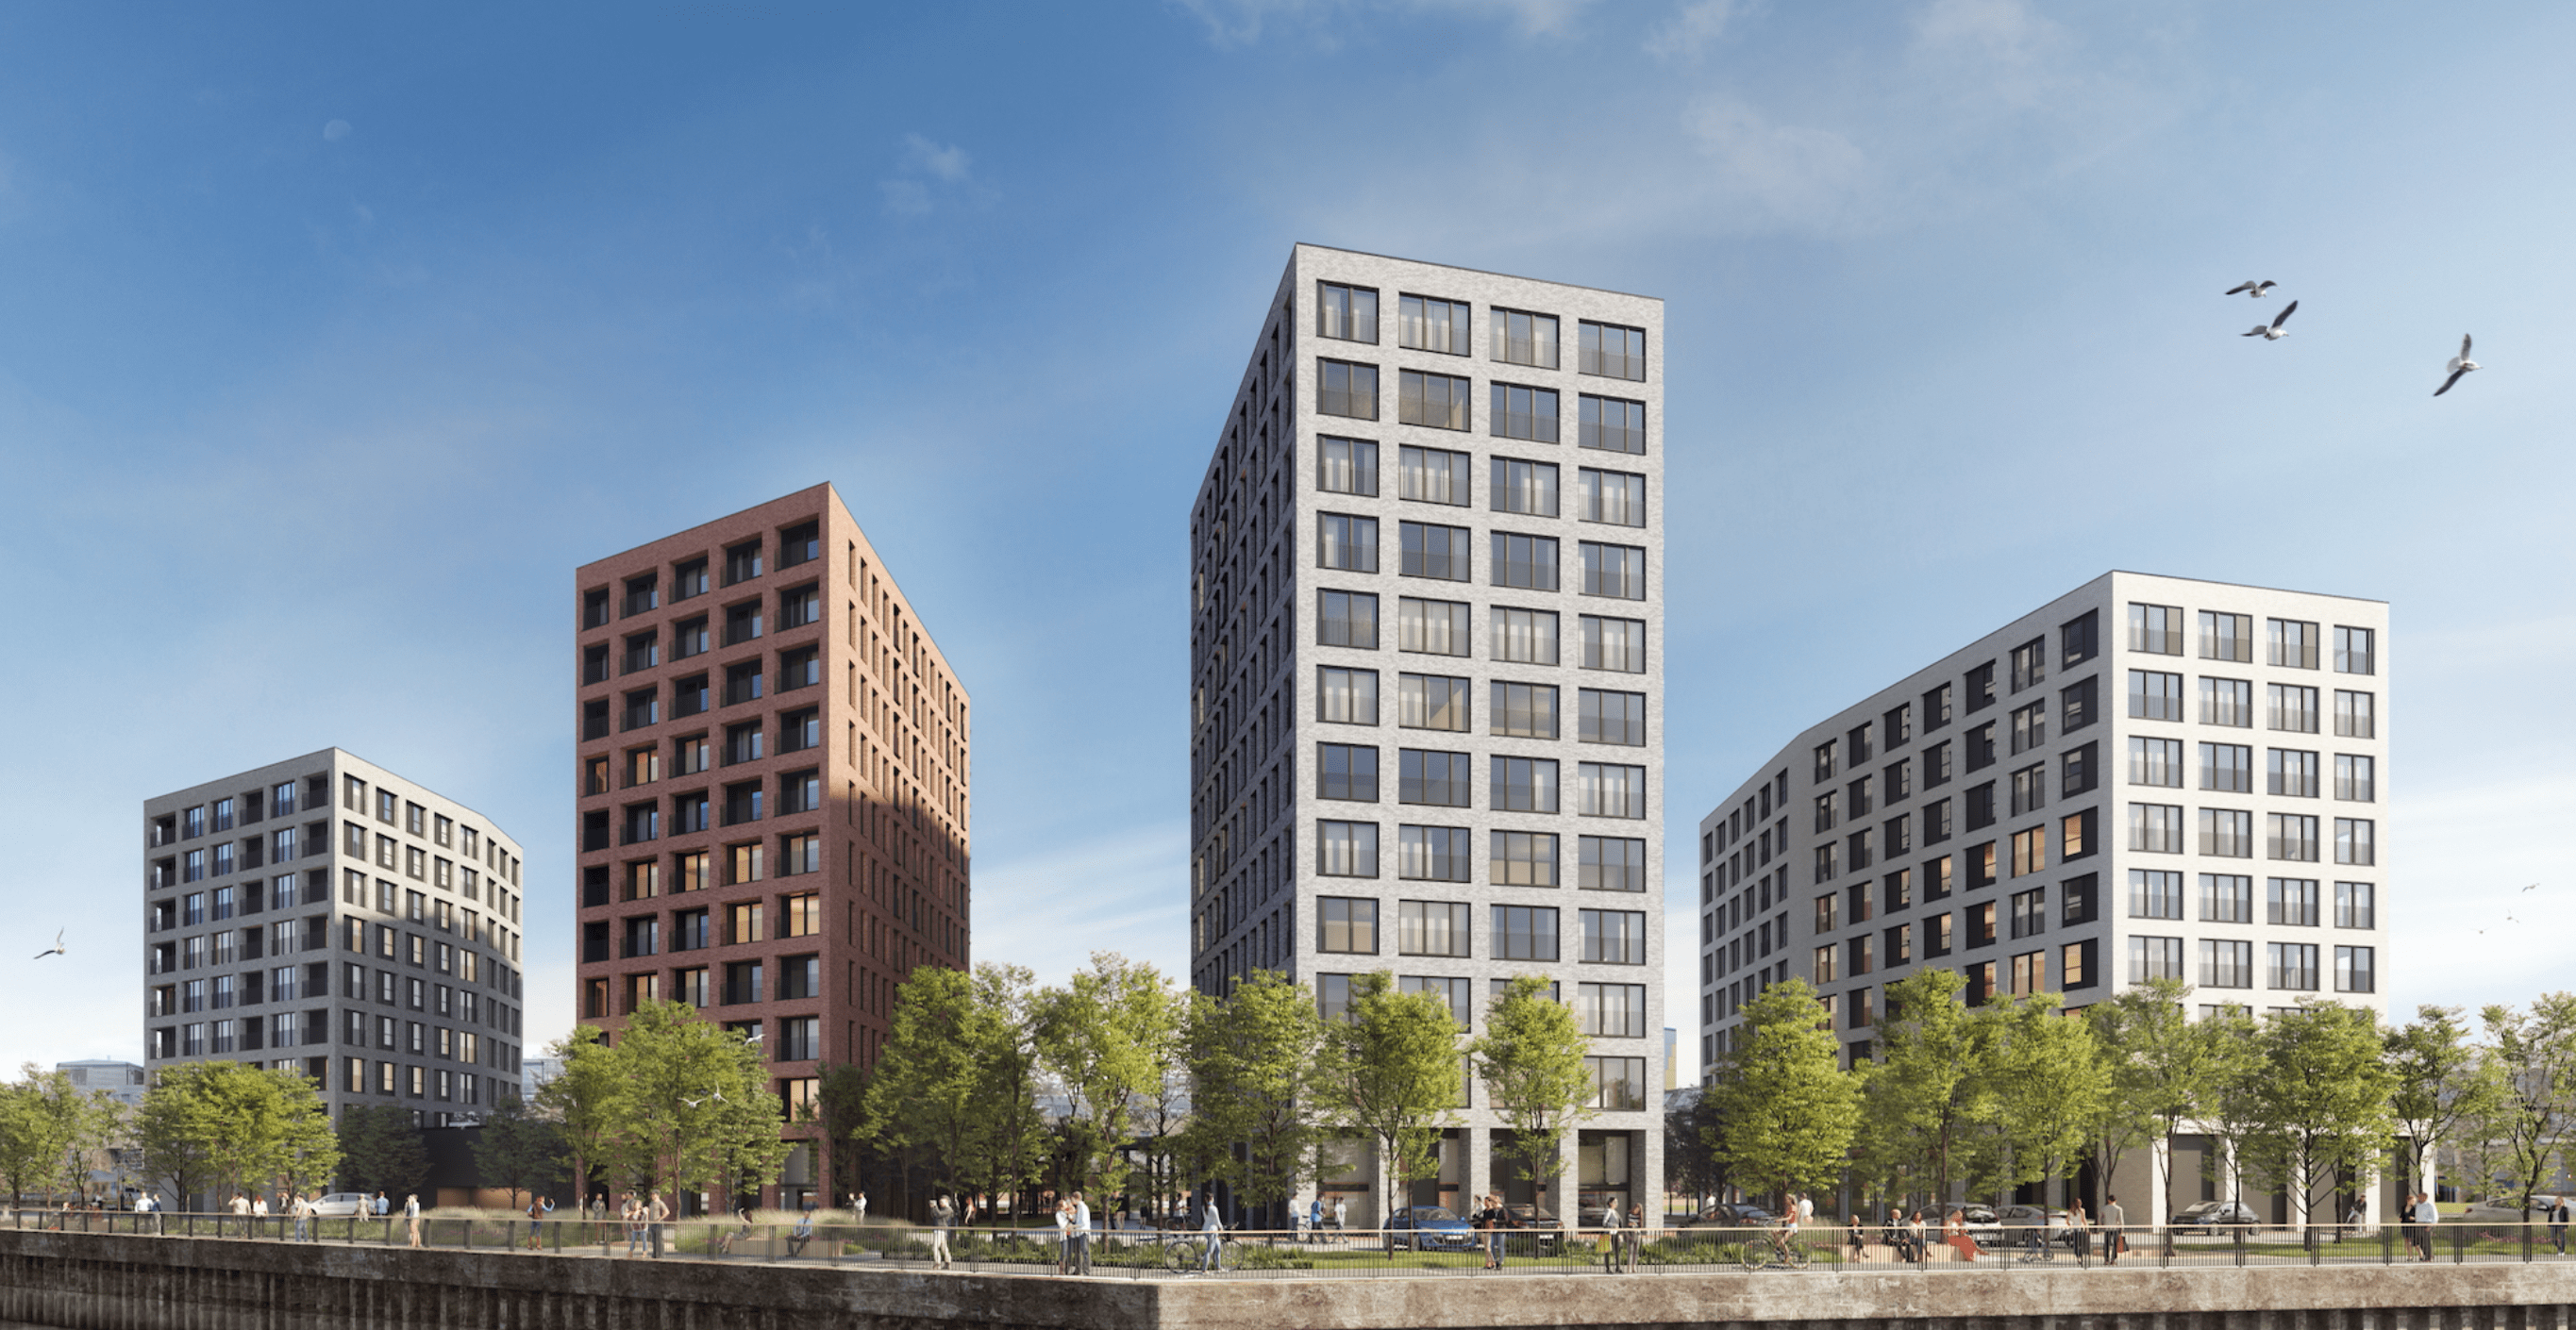 Build-to-rent platform plans 338-home development in Leith